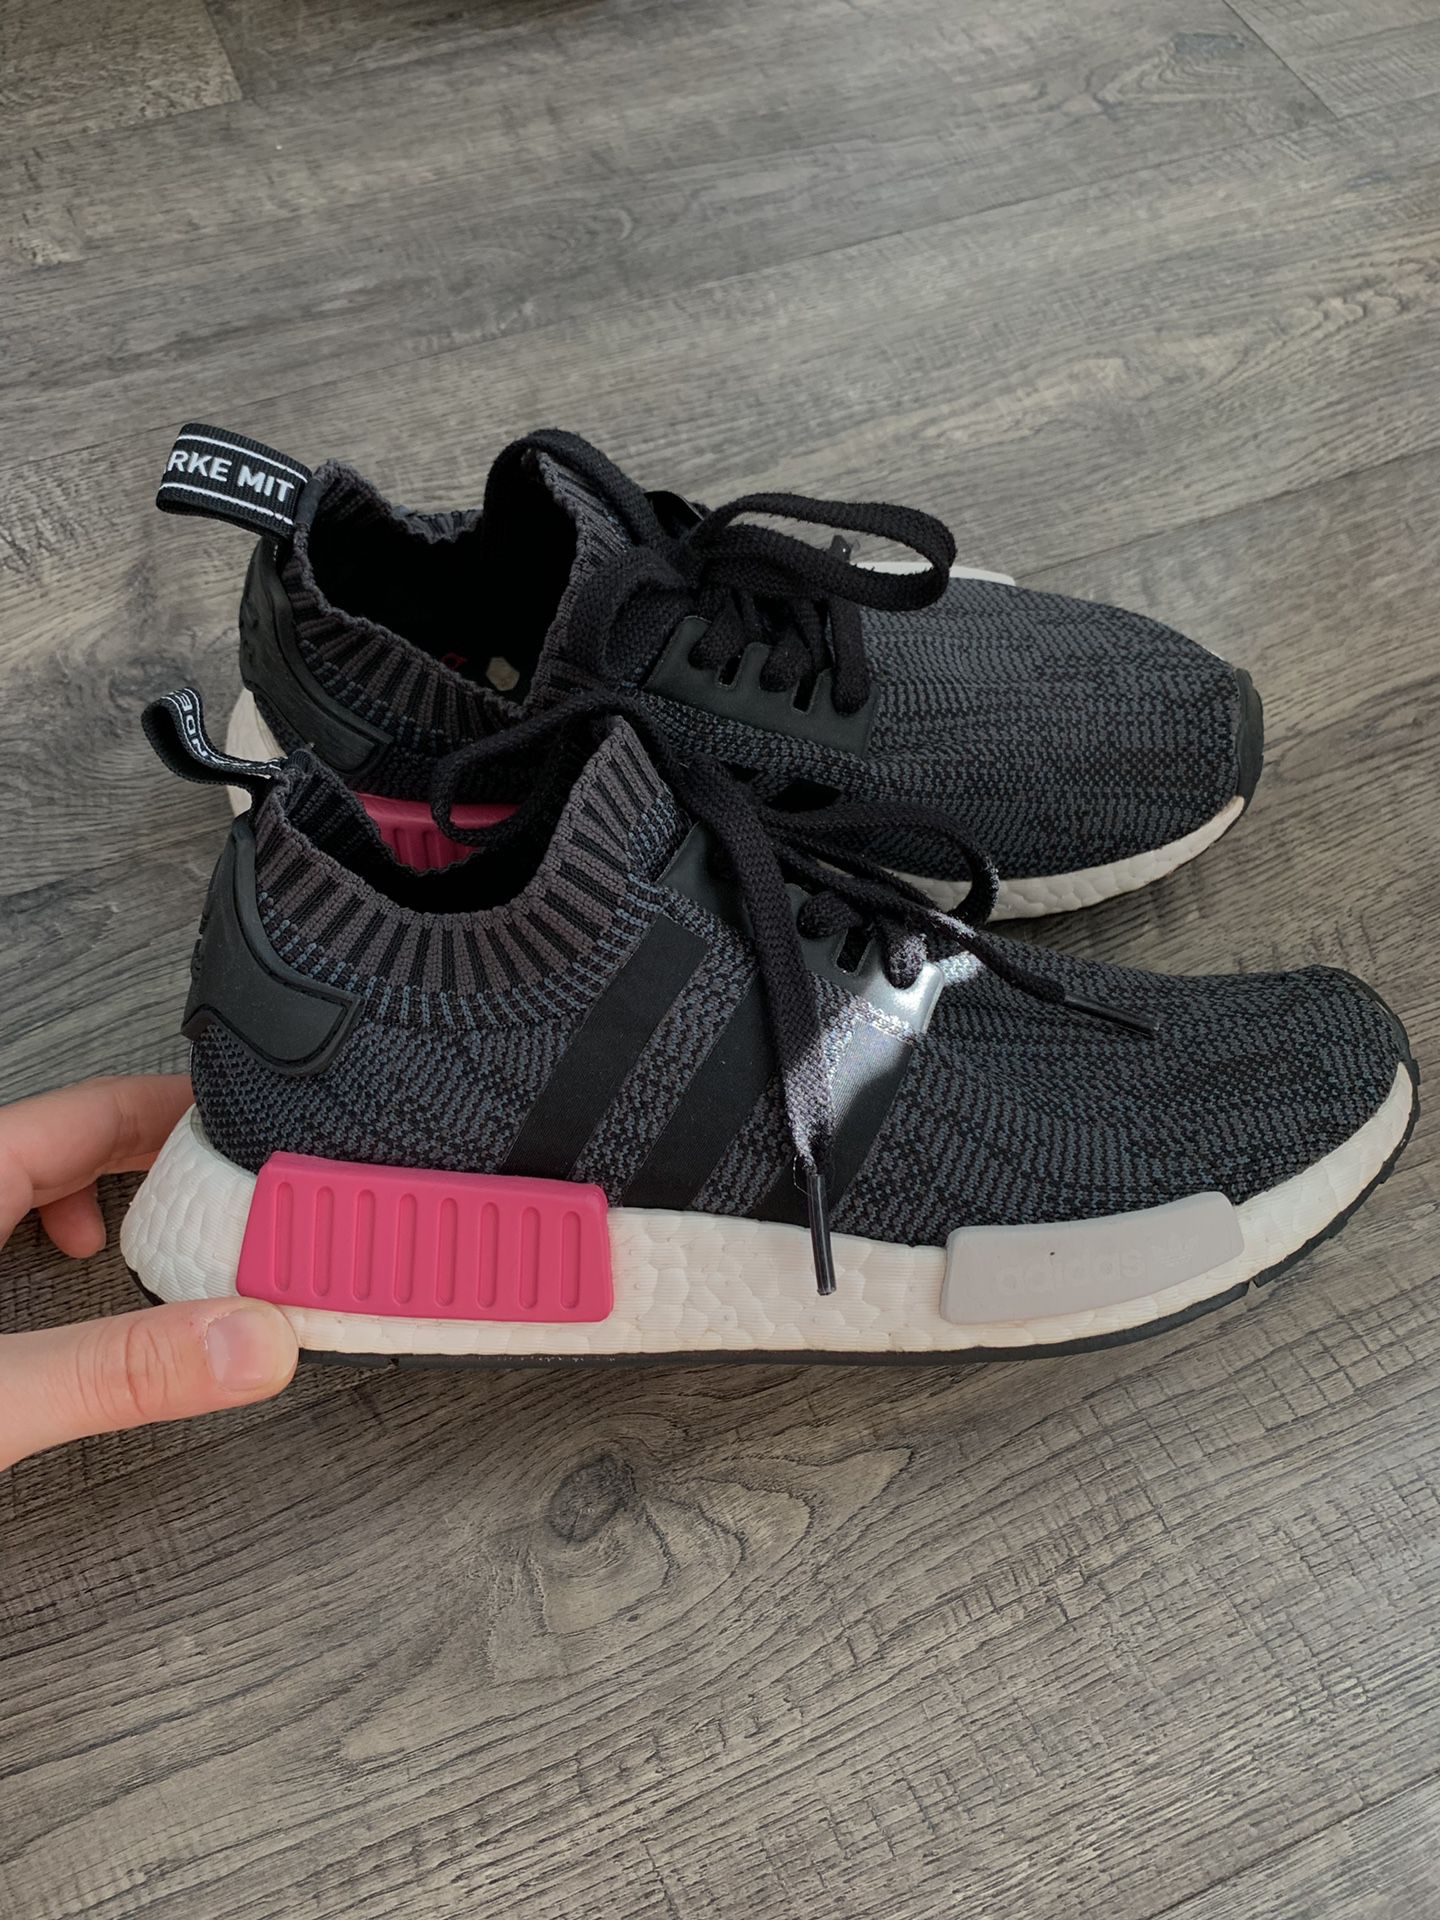 adidas NMD’s size 7